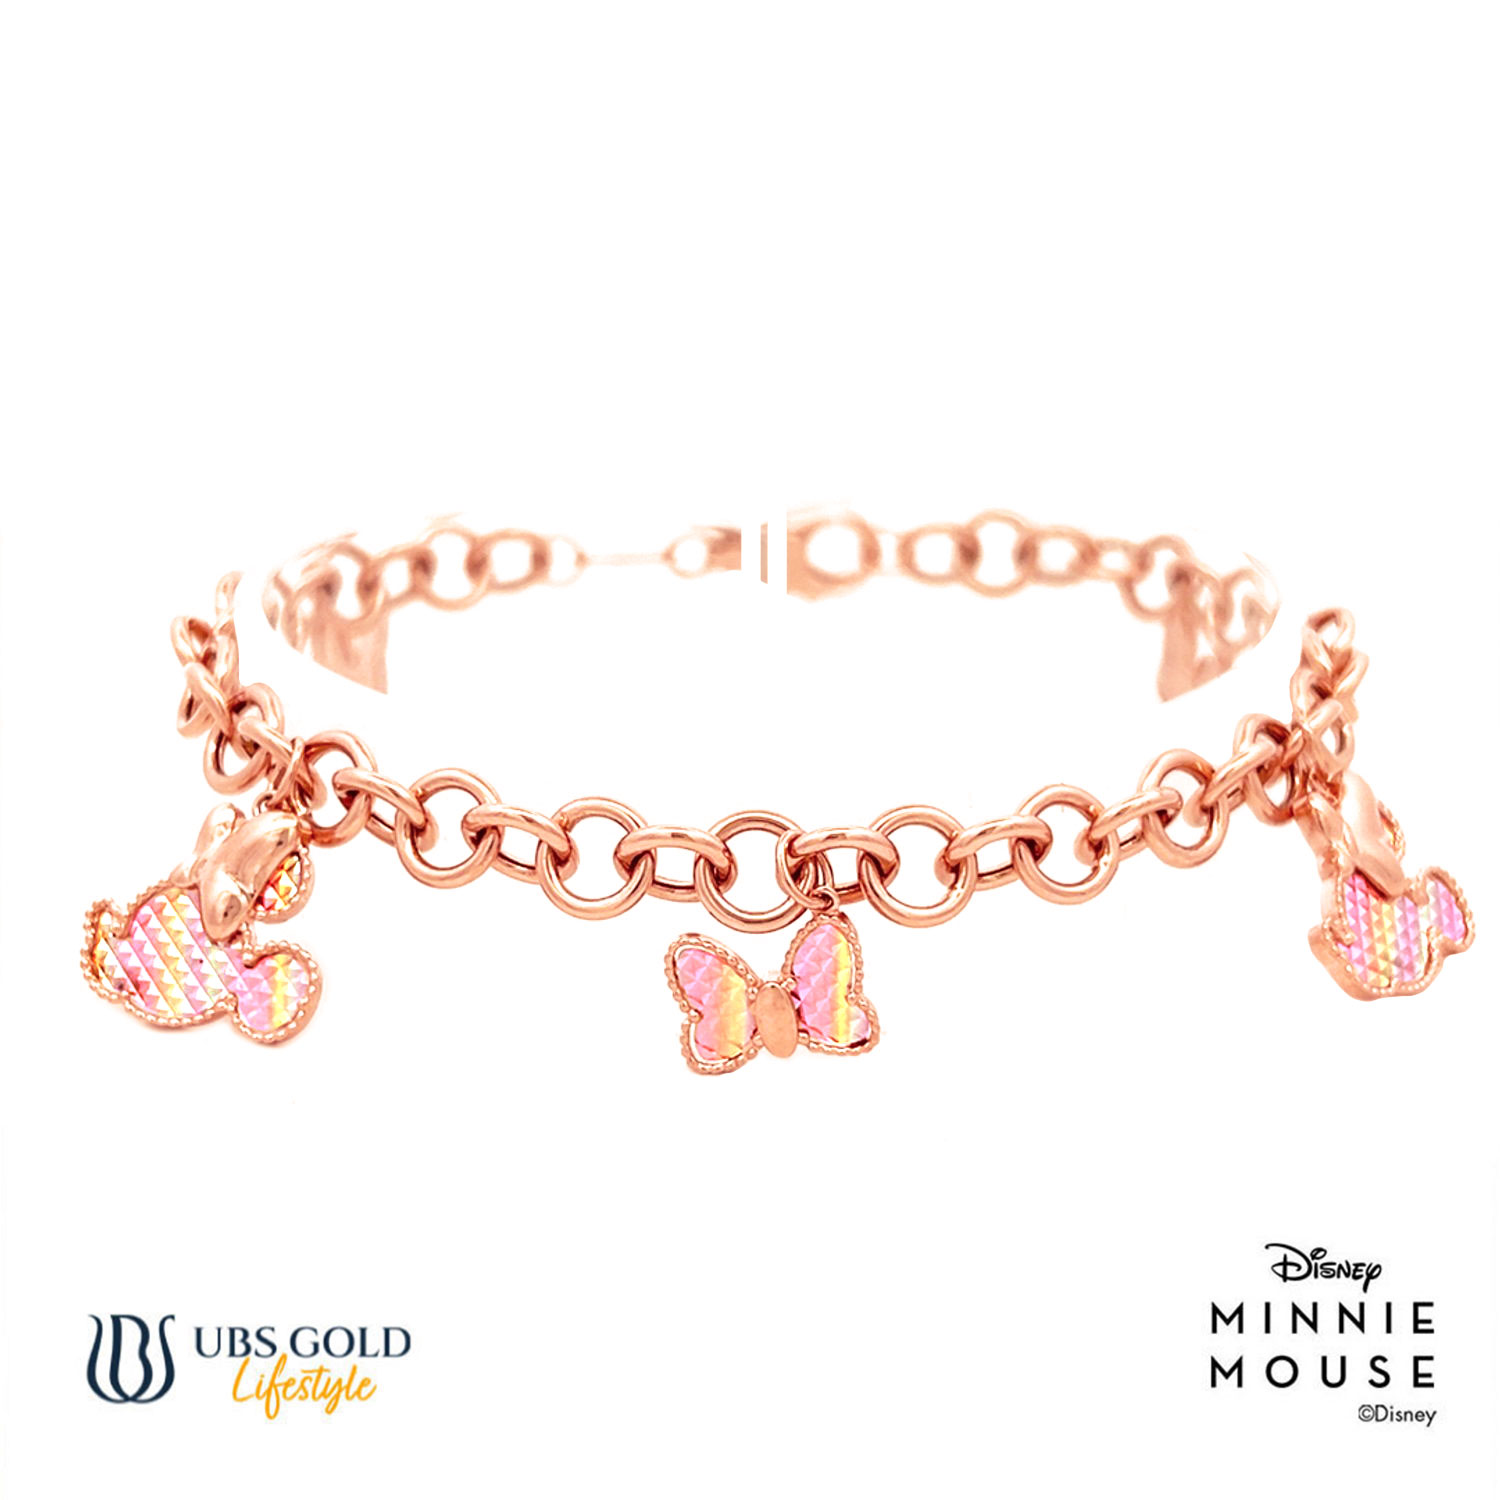 UBS Gold Gelang Emas Disney Minnie Mouse Rainbow - Hgy0169 - 17K